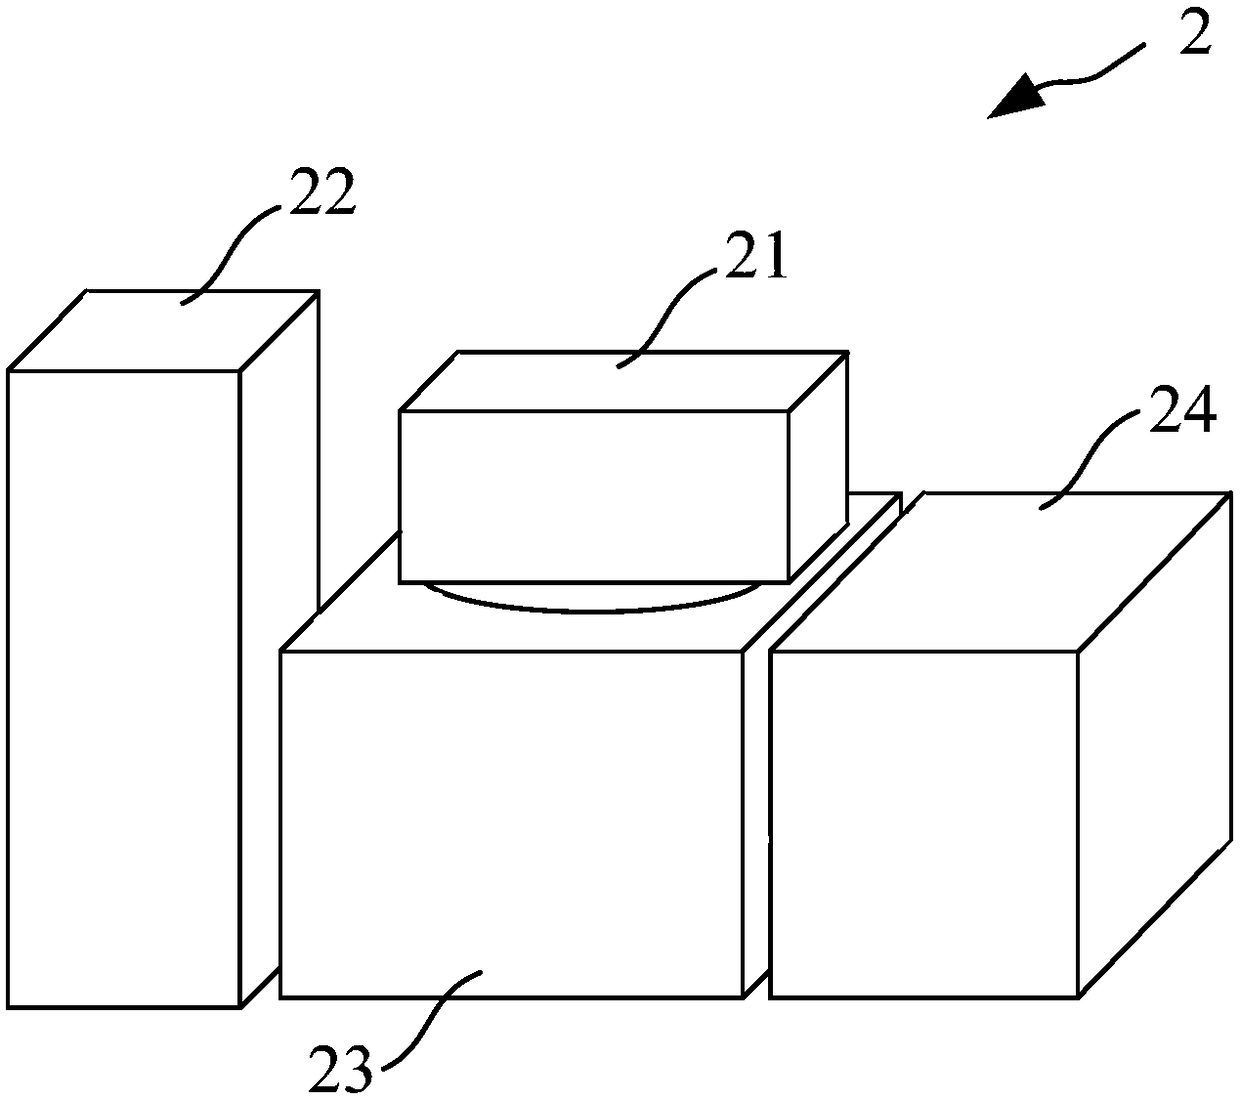 Wafer test device, system and method